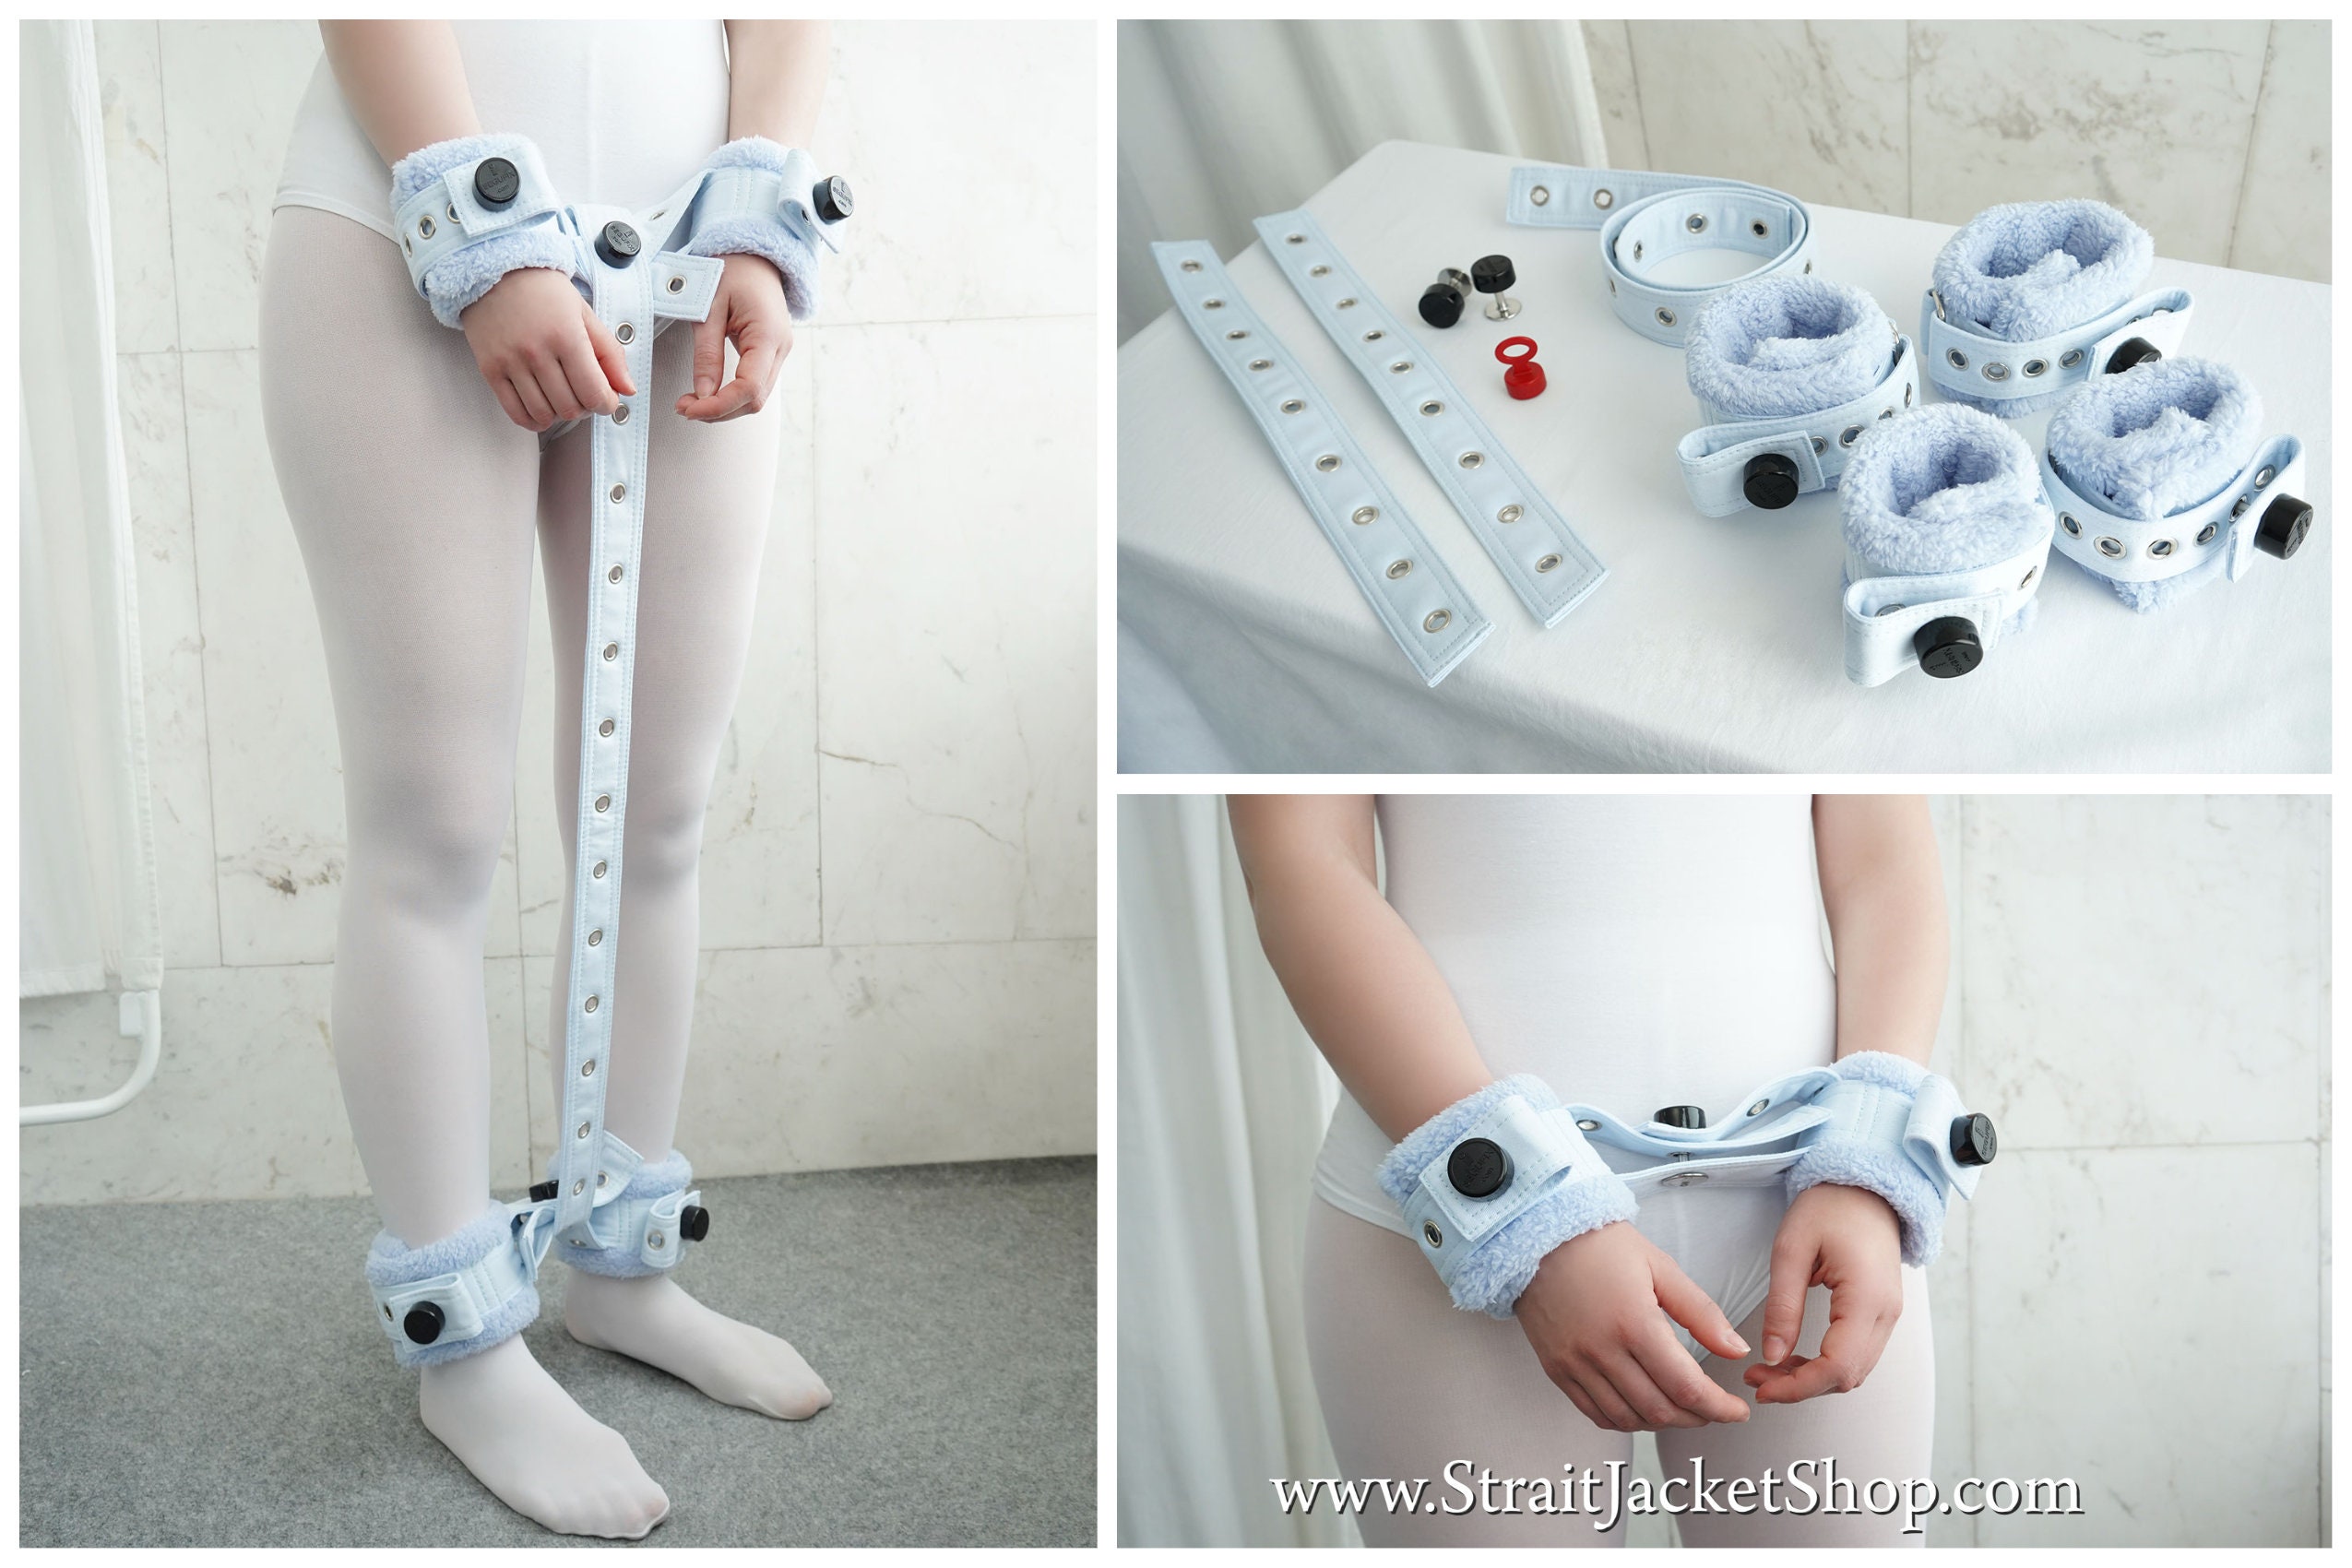 Japanese Teen Hogtied - Set of 4 Blue Soft Padded Fleece Wrist and Ankle Cuffs - Etsy